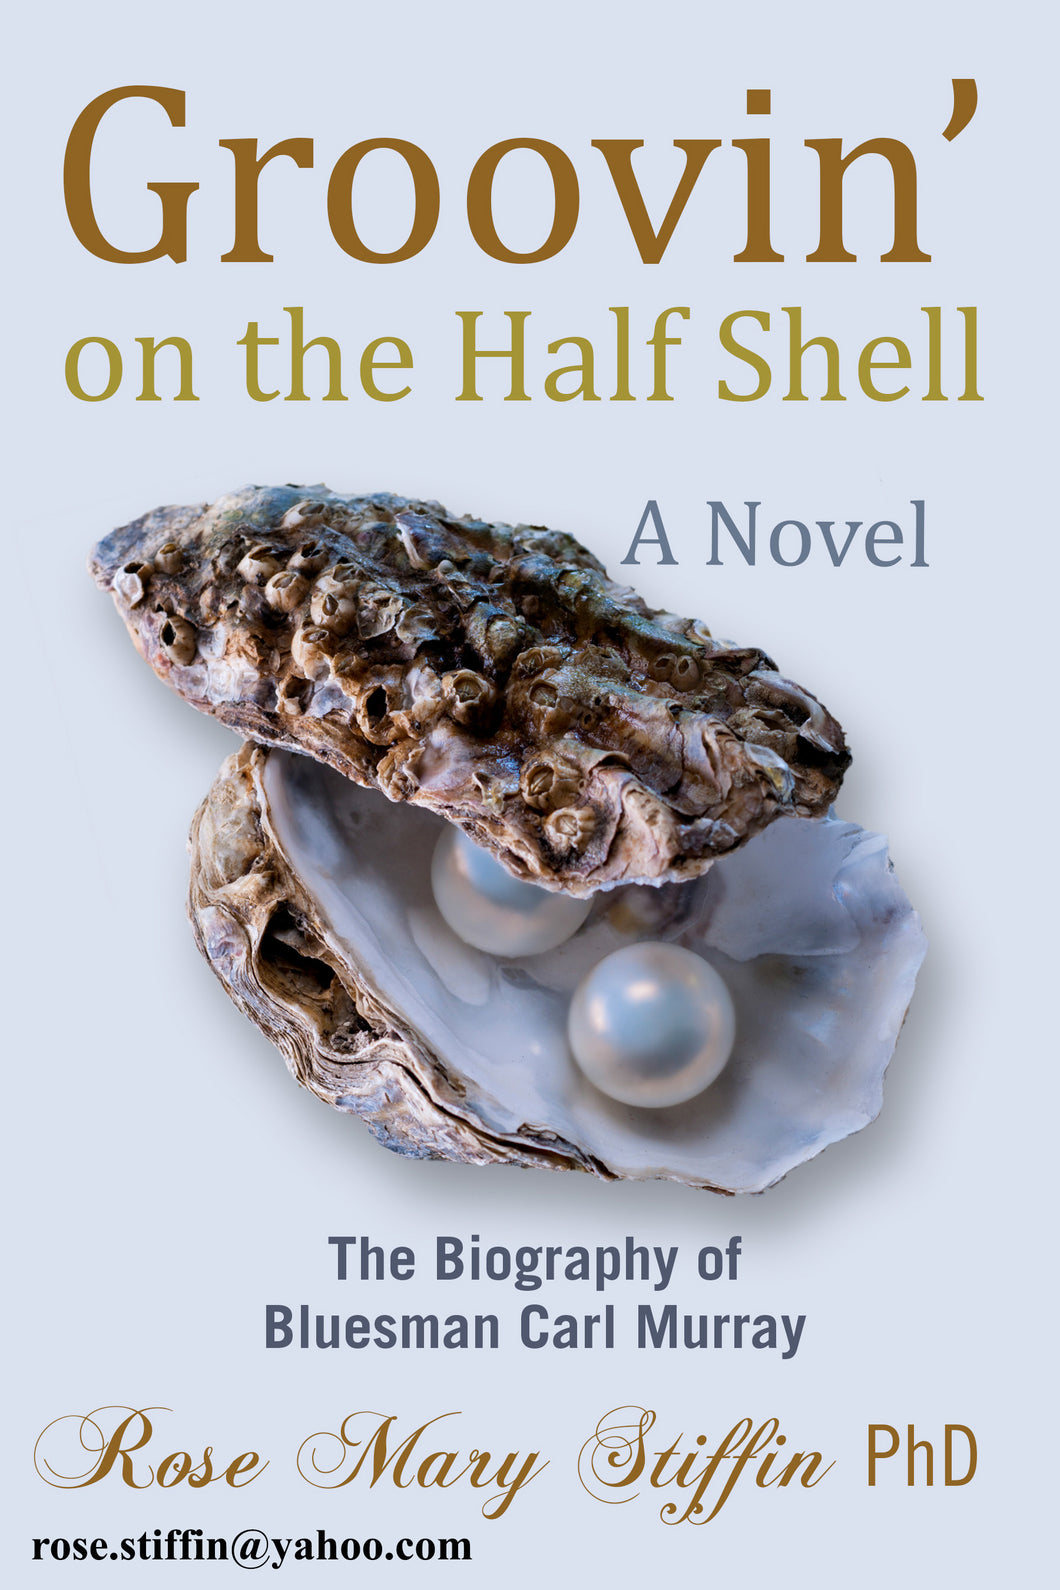 Groovin' on the Half Shell (paperback)